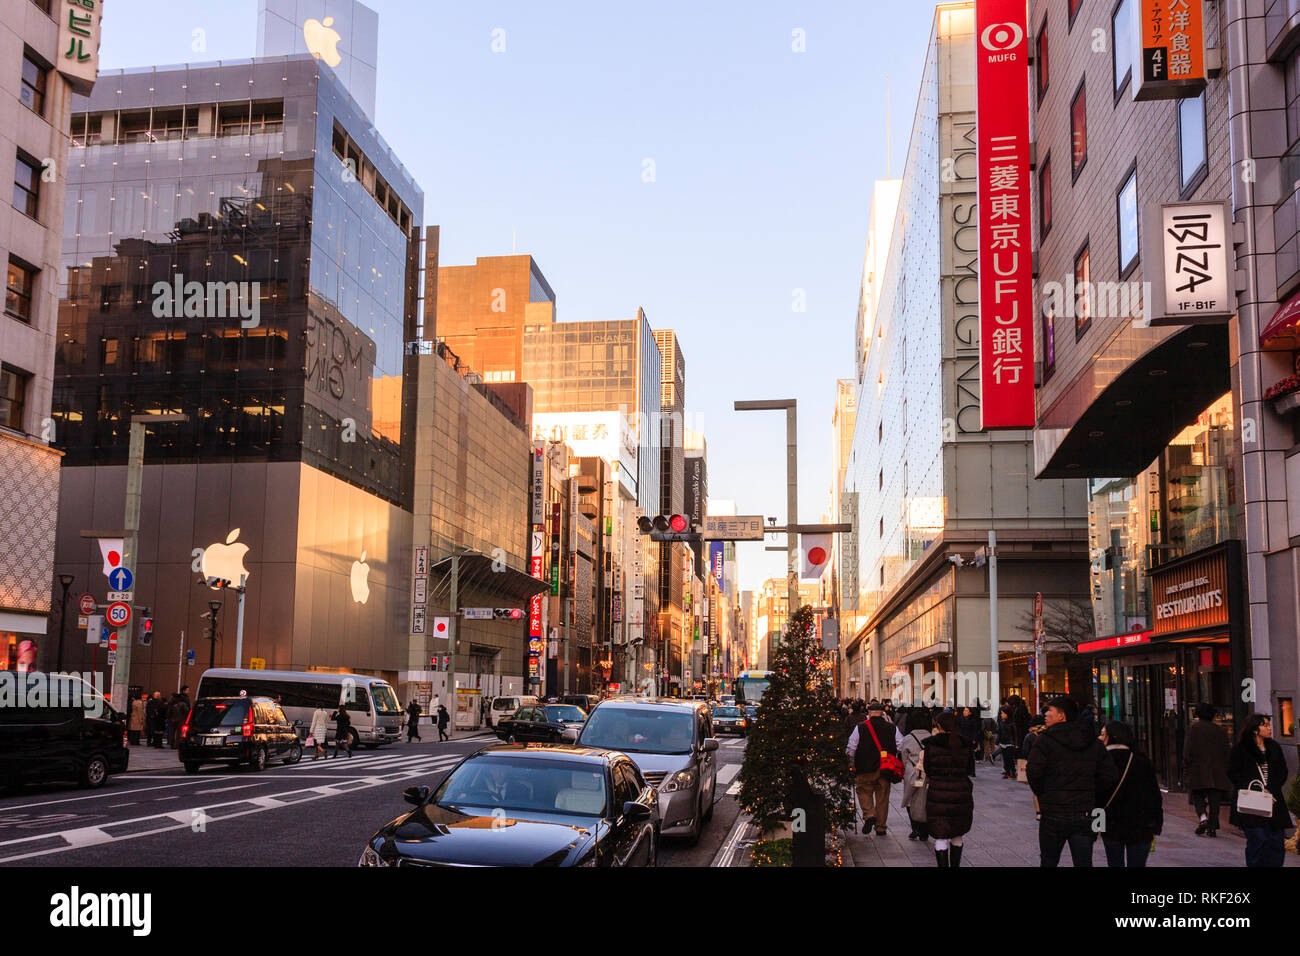 Tokyo Ginza At Golden Hour View Along Street And Matsuya And Apple Stores Pavement Busy With Shoppers Illuminated Christmas Trees On Sidewalk Stock Photo Alamy